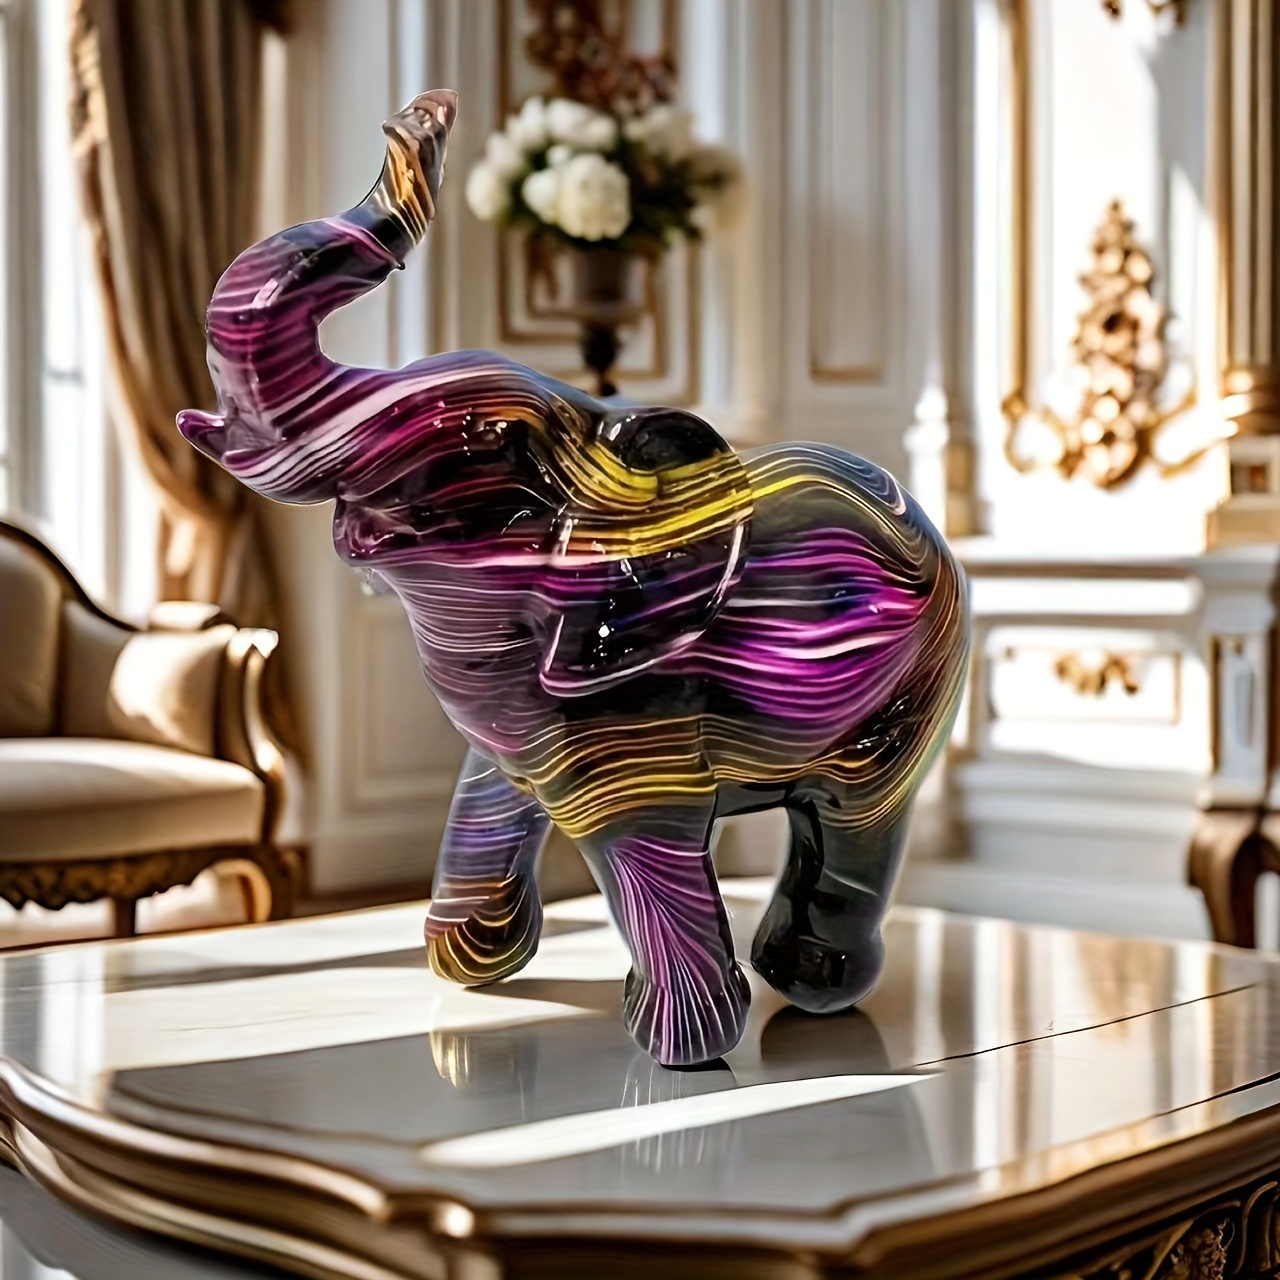 

1pc, Trendy And Colorful Elephant Resin Statue Decorative Crafts Suitable For Decorating Art Decorations Such As Living Rooms Bedrooms Study Desks Office Desks Etc In Apartments